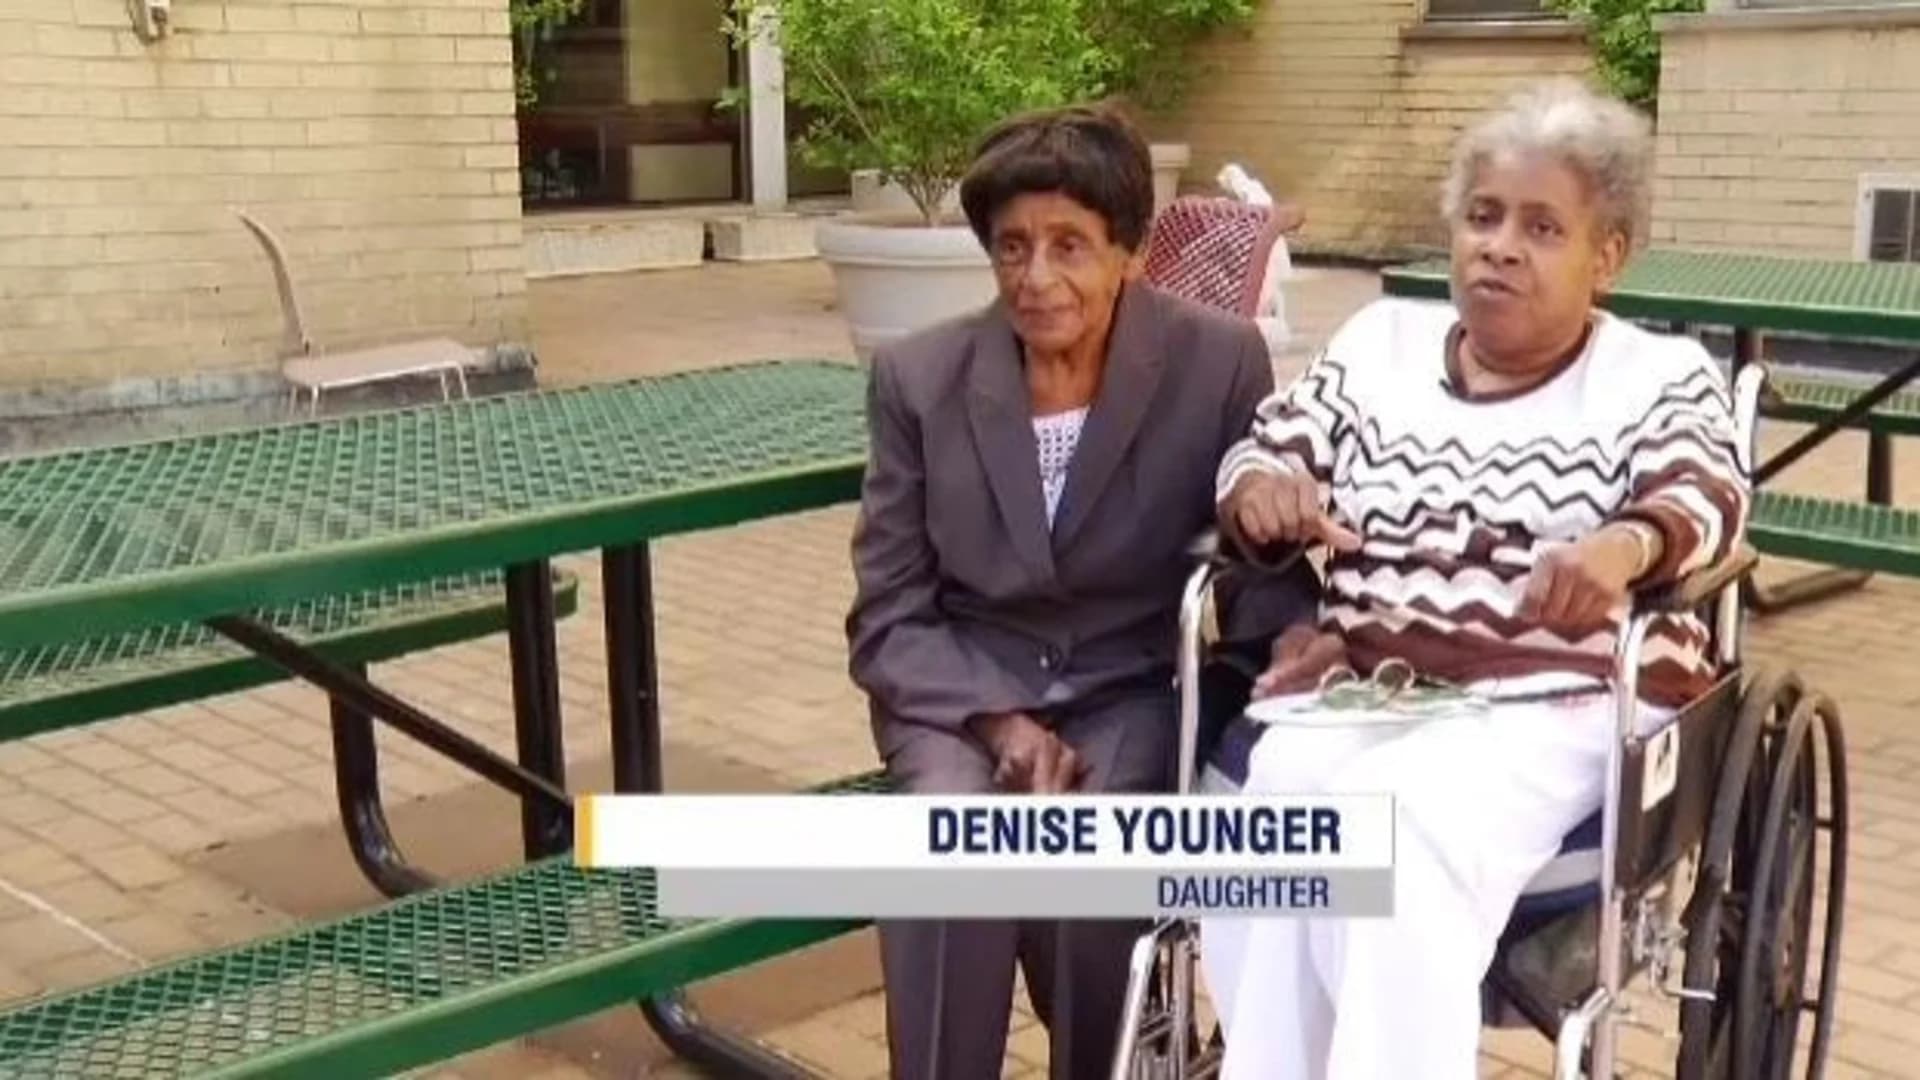 90-year-old mother visits disabled daughter 6 days a week